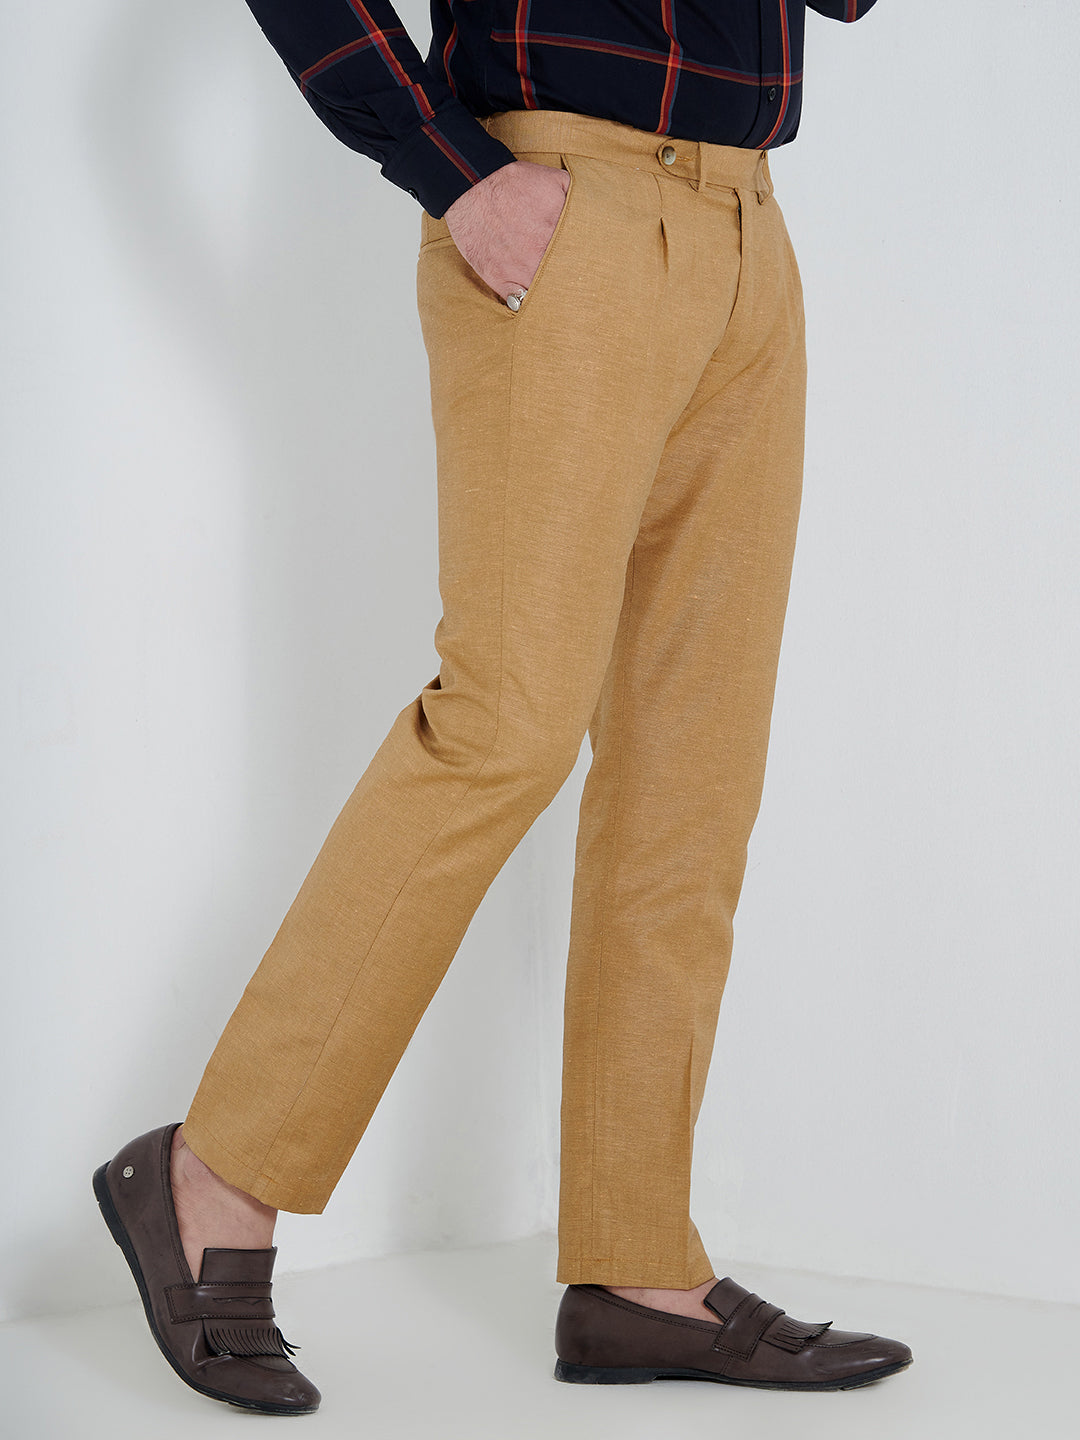 Trousers - Buy Trousers online in India